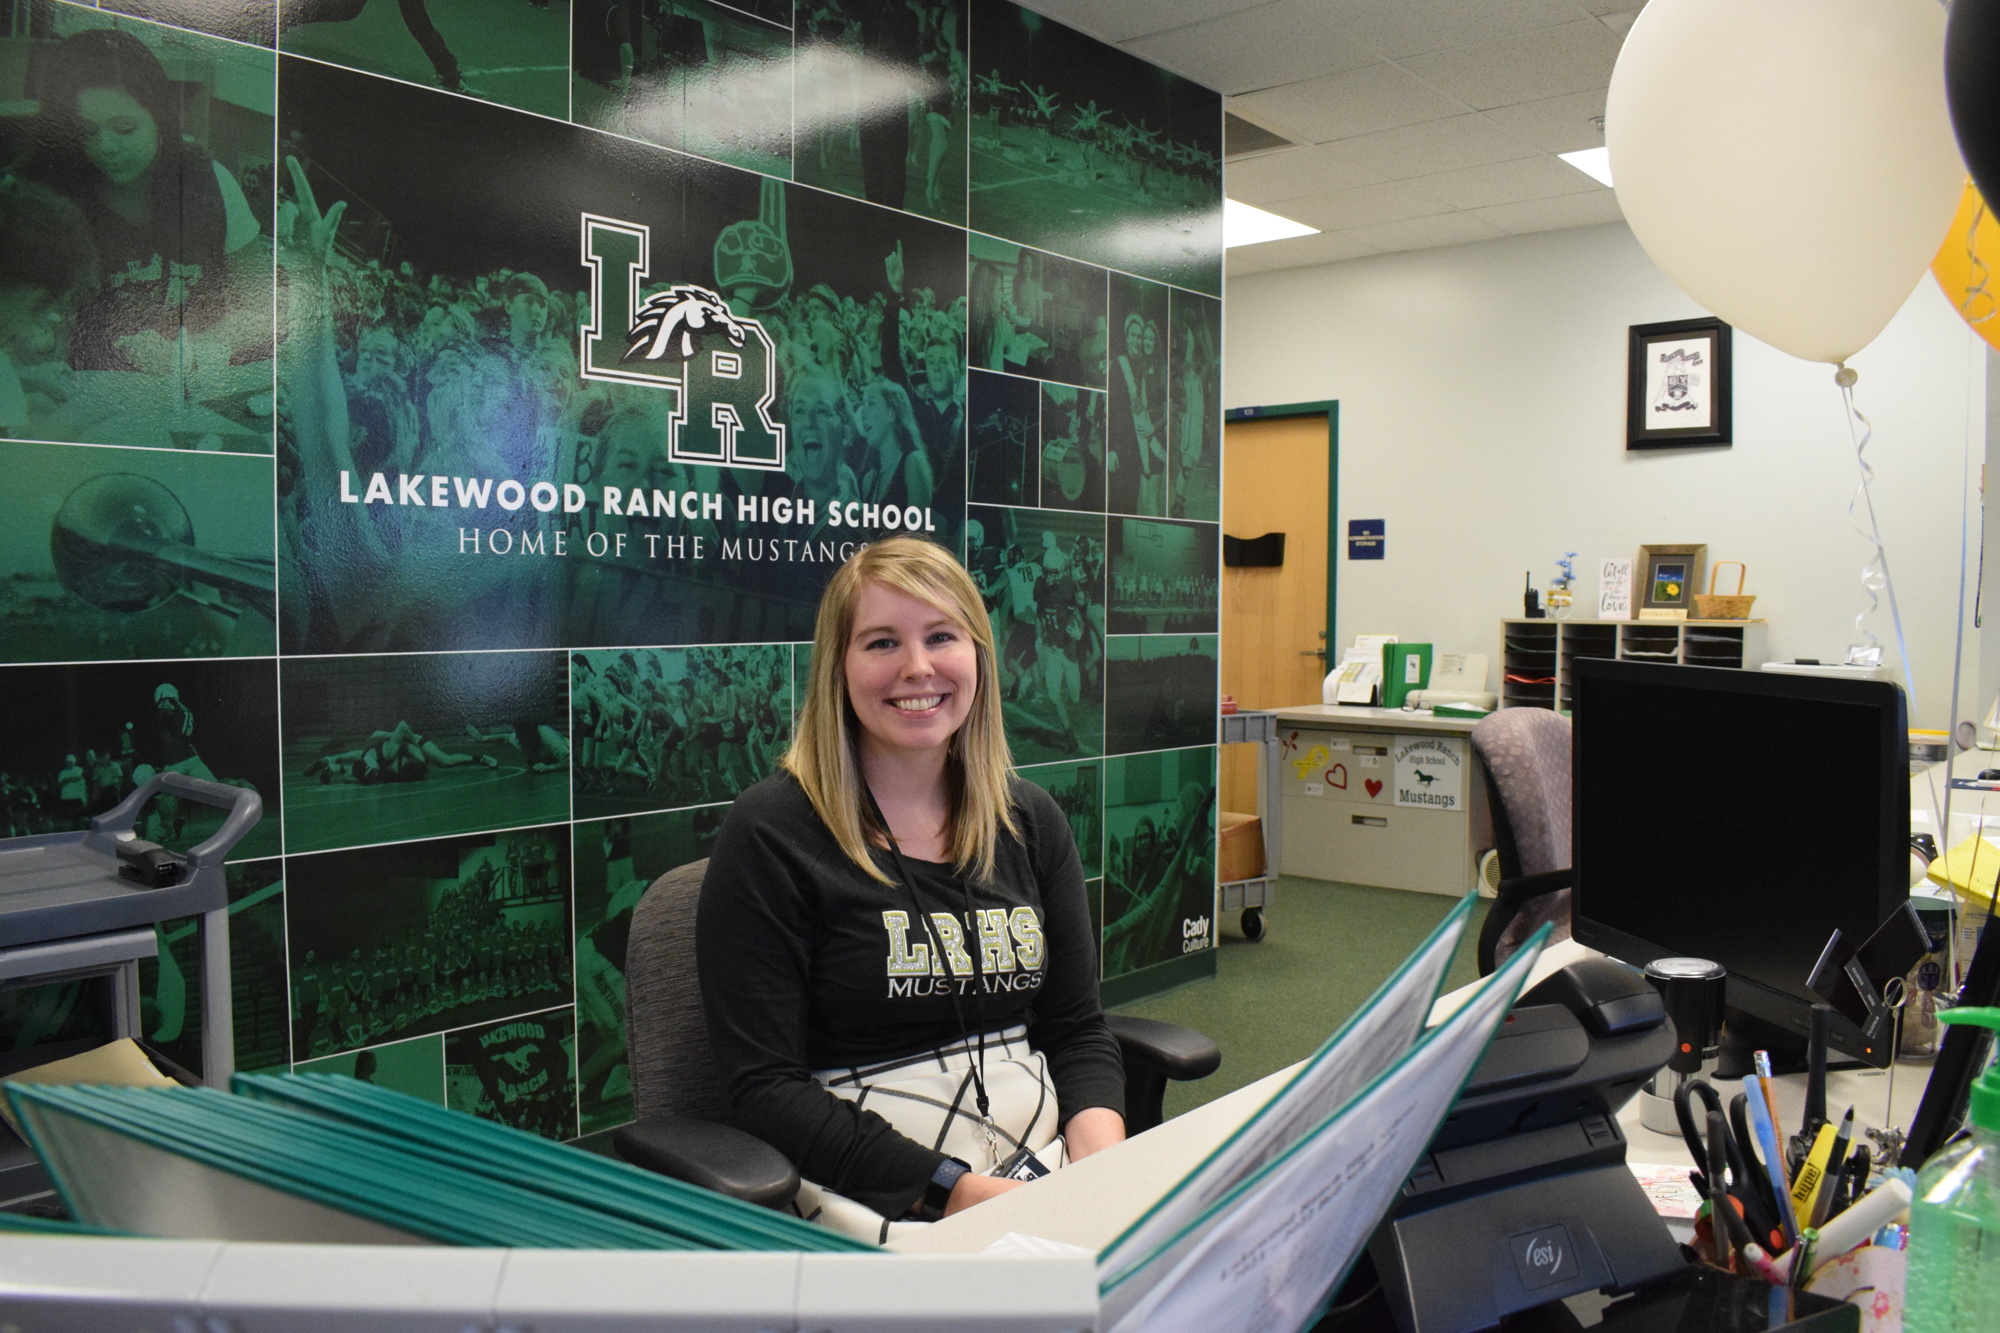 Kari Keech-Babcock, a guidance clerk at Lakewood Ranch High School, loves building relationships with students and their families.